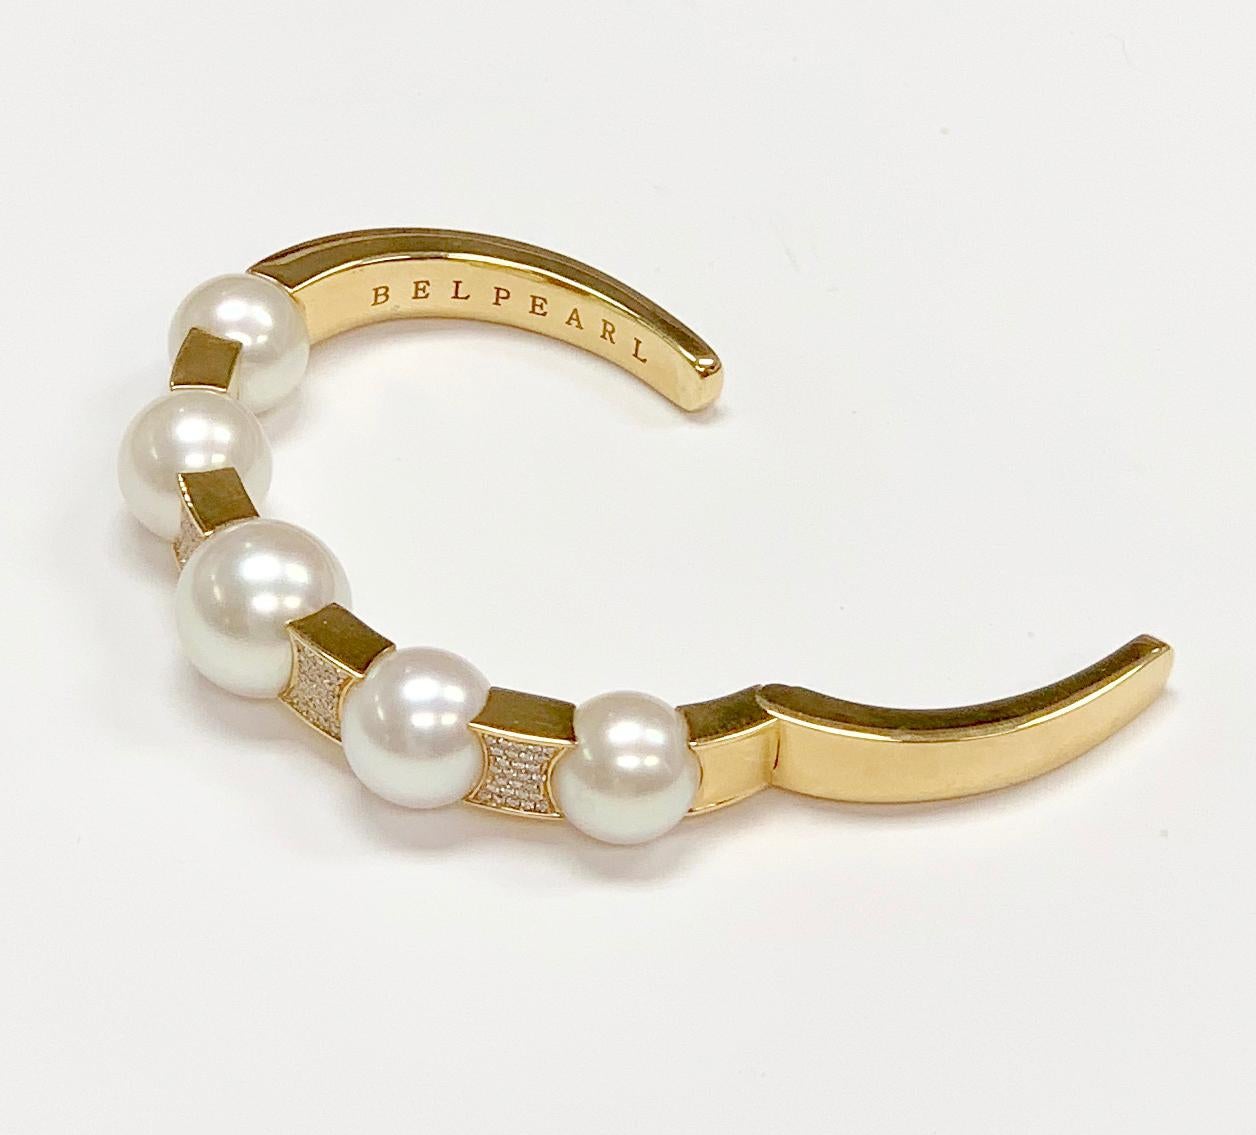 Exquisite Cuff made with Graduated White South Sea pearls set in 18K yellow gold.
Stunning design with a center pearl measuring 15mm, this cuff will enhance you style and make you stand out from the crowd.
Available with Golden South pearls as well